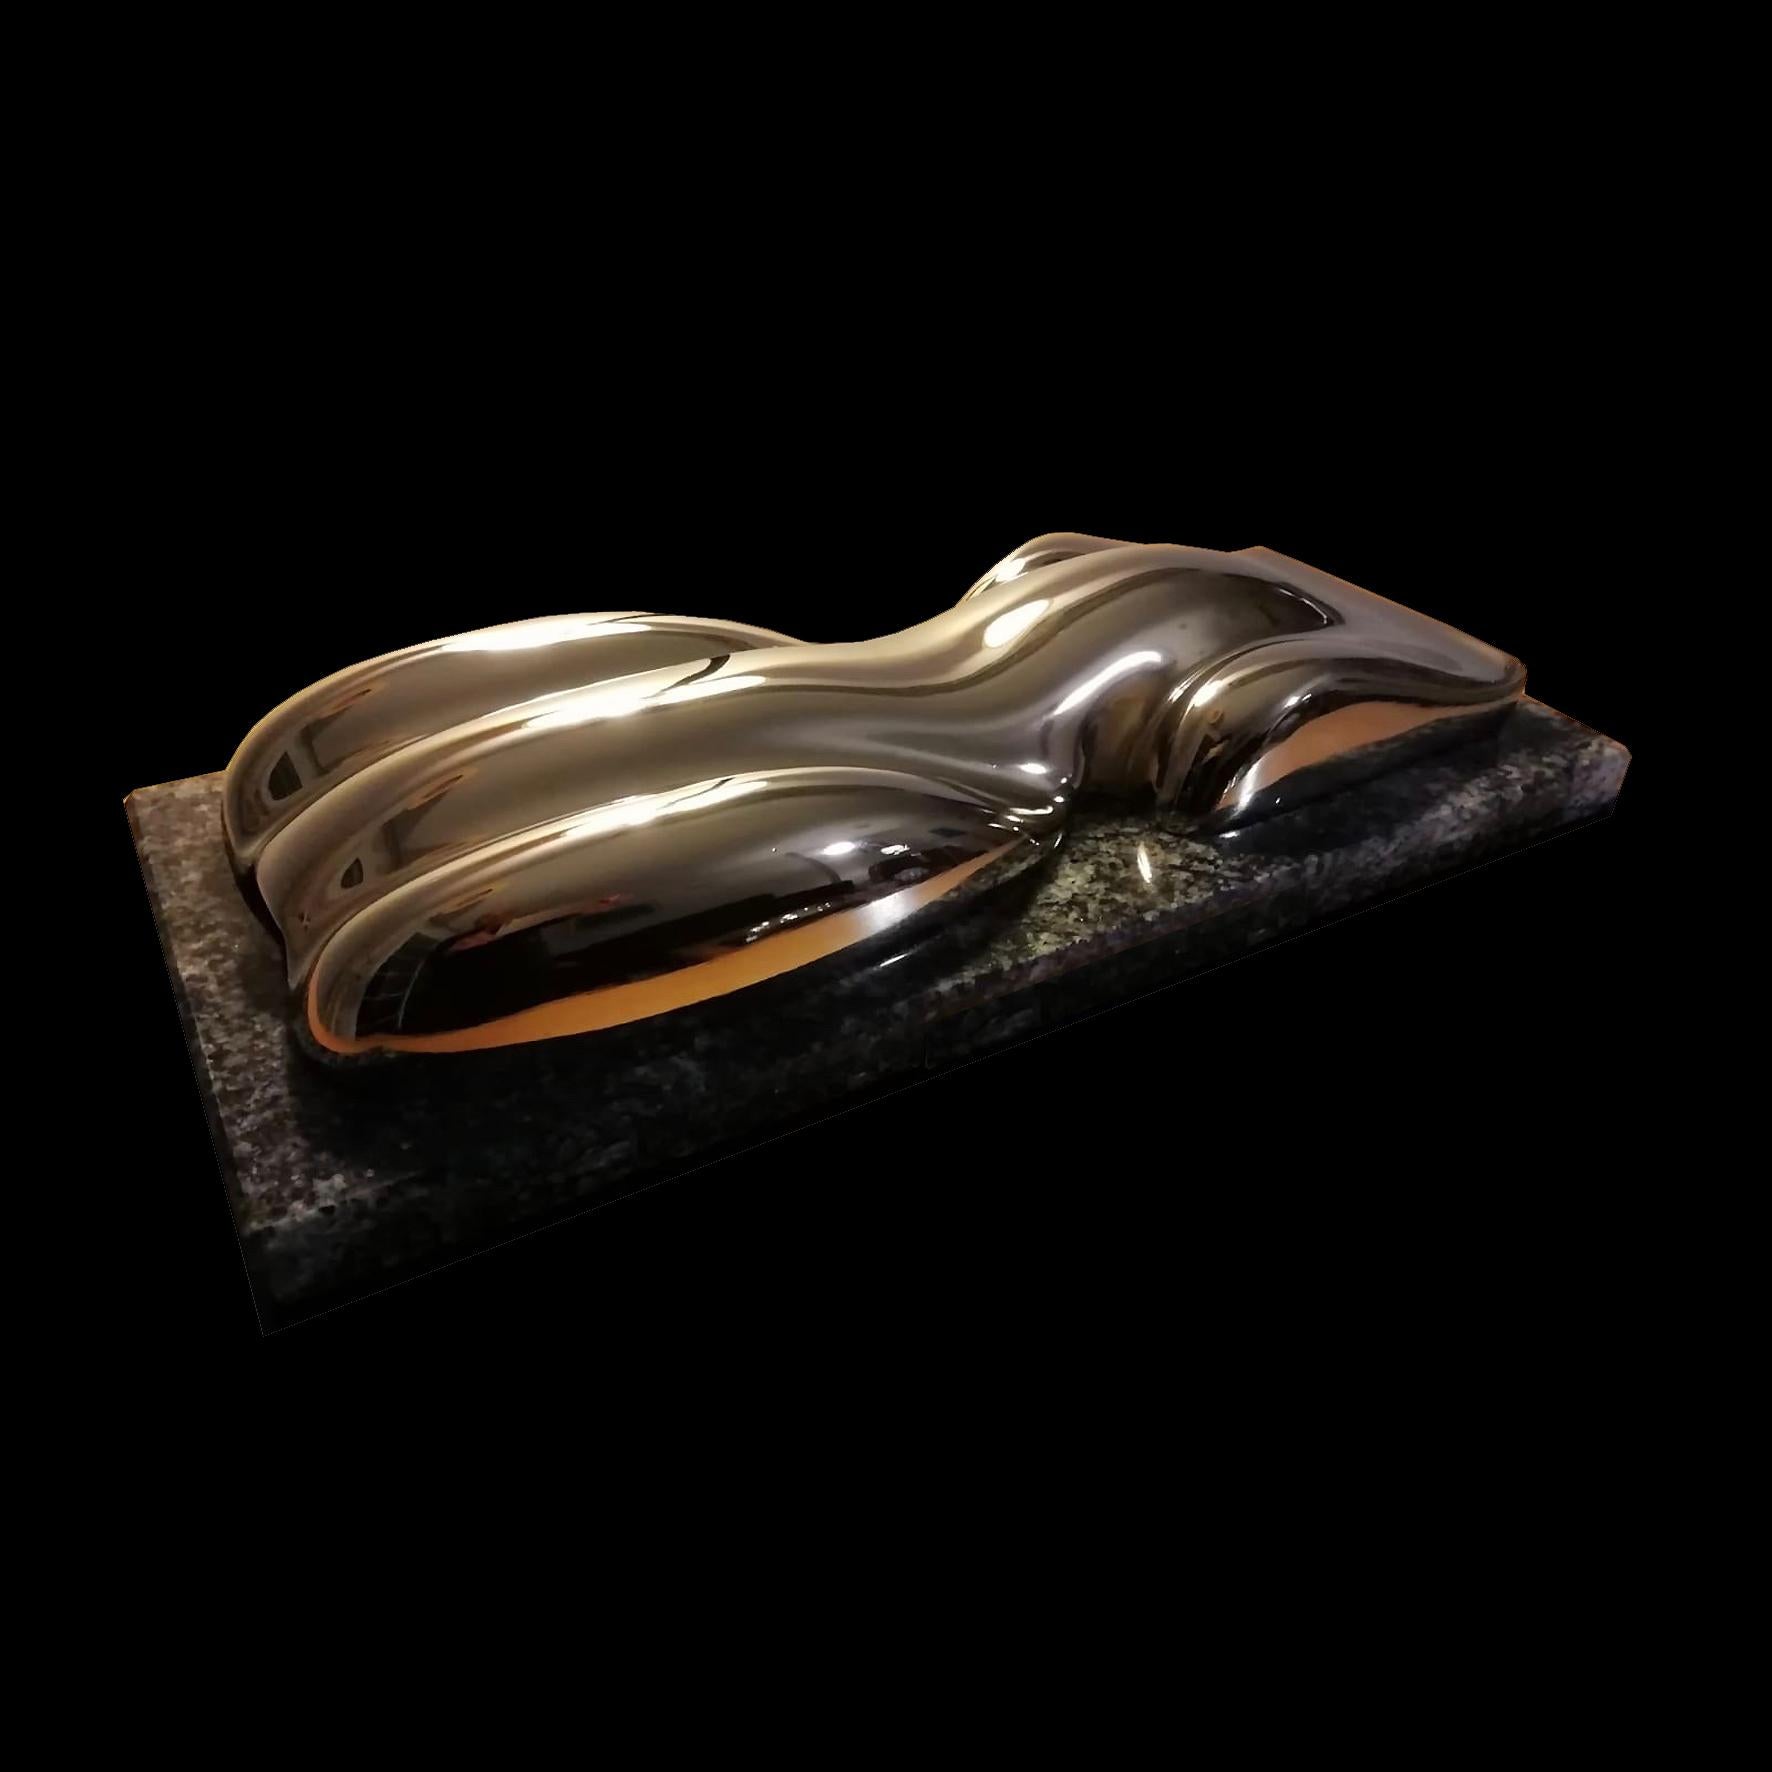 Carmel

A silvered plaster model of a racing car.
On a Cheyenne marble or rectangular wood base.

Belzoni finds inspiration in the legendary racing cars of the 1950s and the 1960s.
His elegant sculptures epitomize the spirit of a glorious